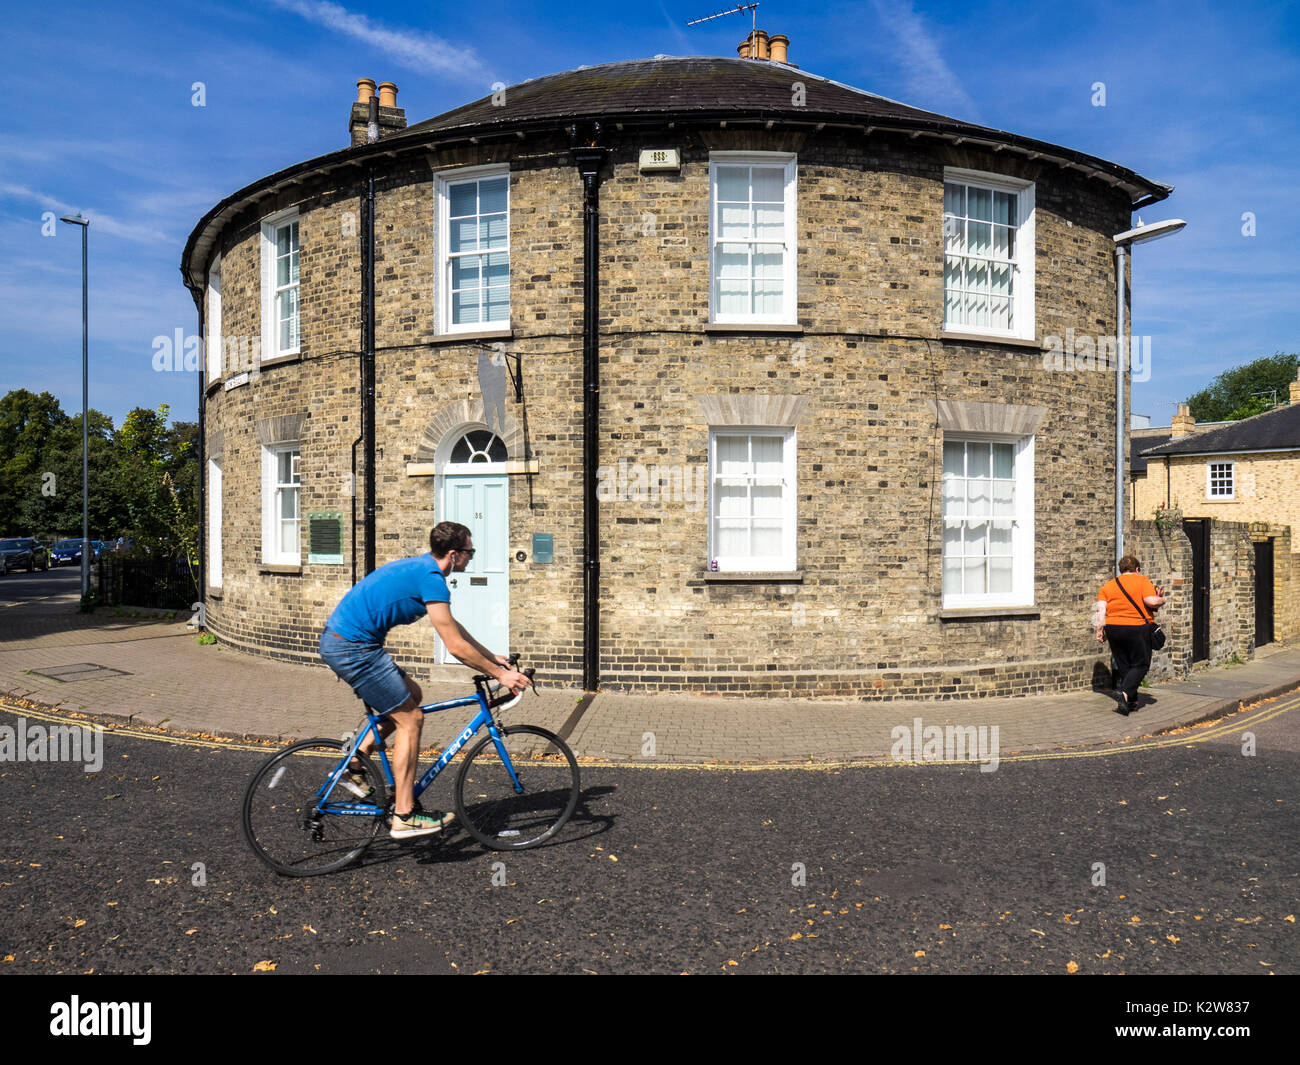 Round fronted house in Cambridge UK - a cyclist passes a round fronted building in New Square, Cambridge UK Stock Photo